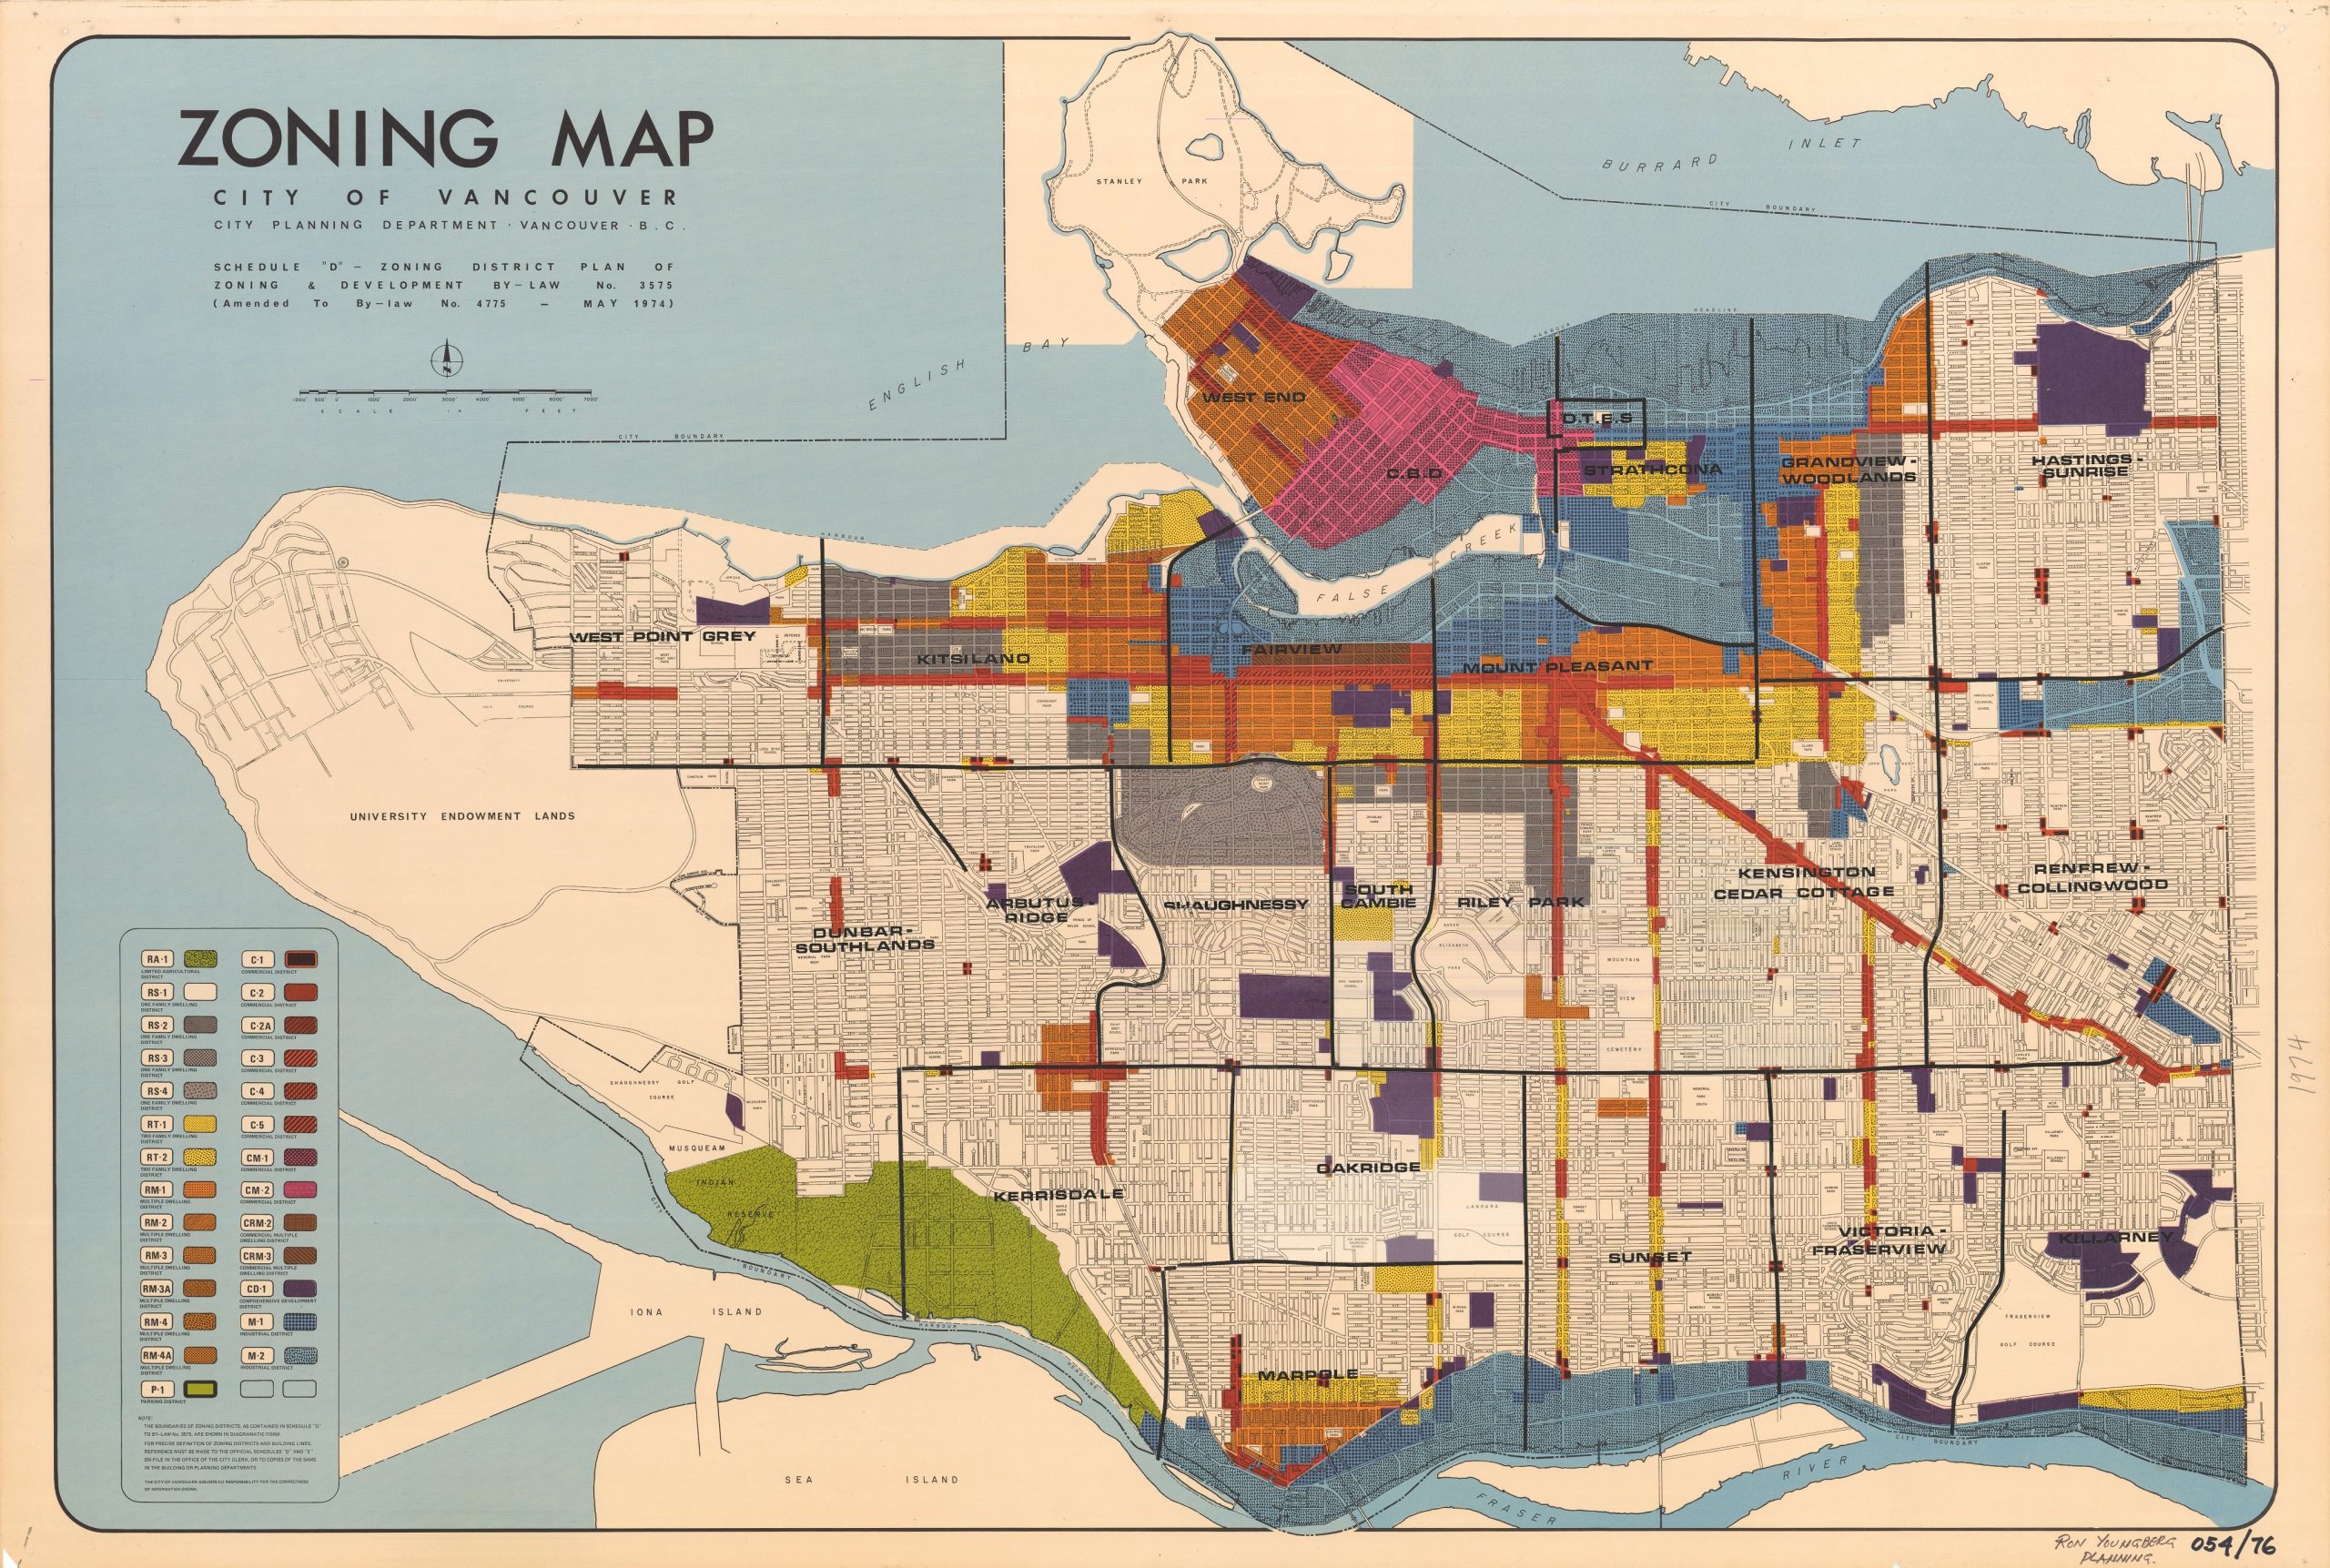 Zoning map from 1974. Reference code: PUB-: PD 2100.4